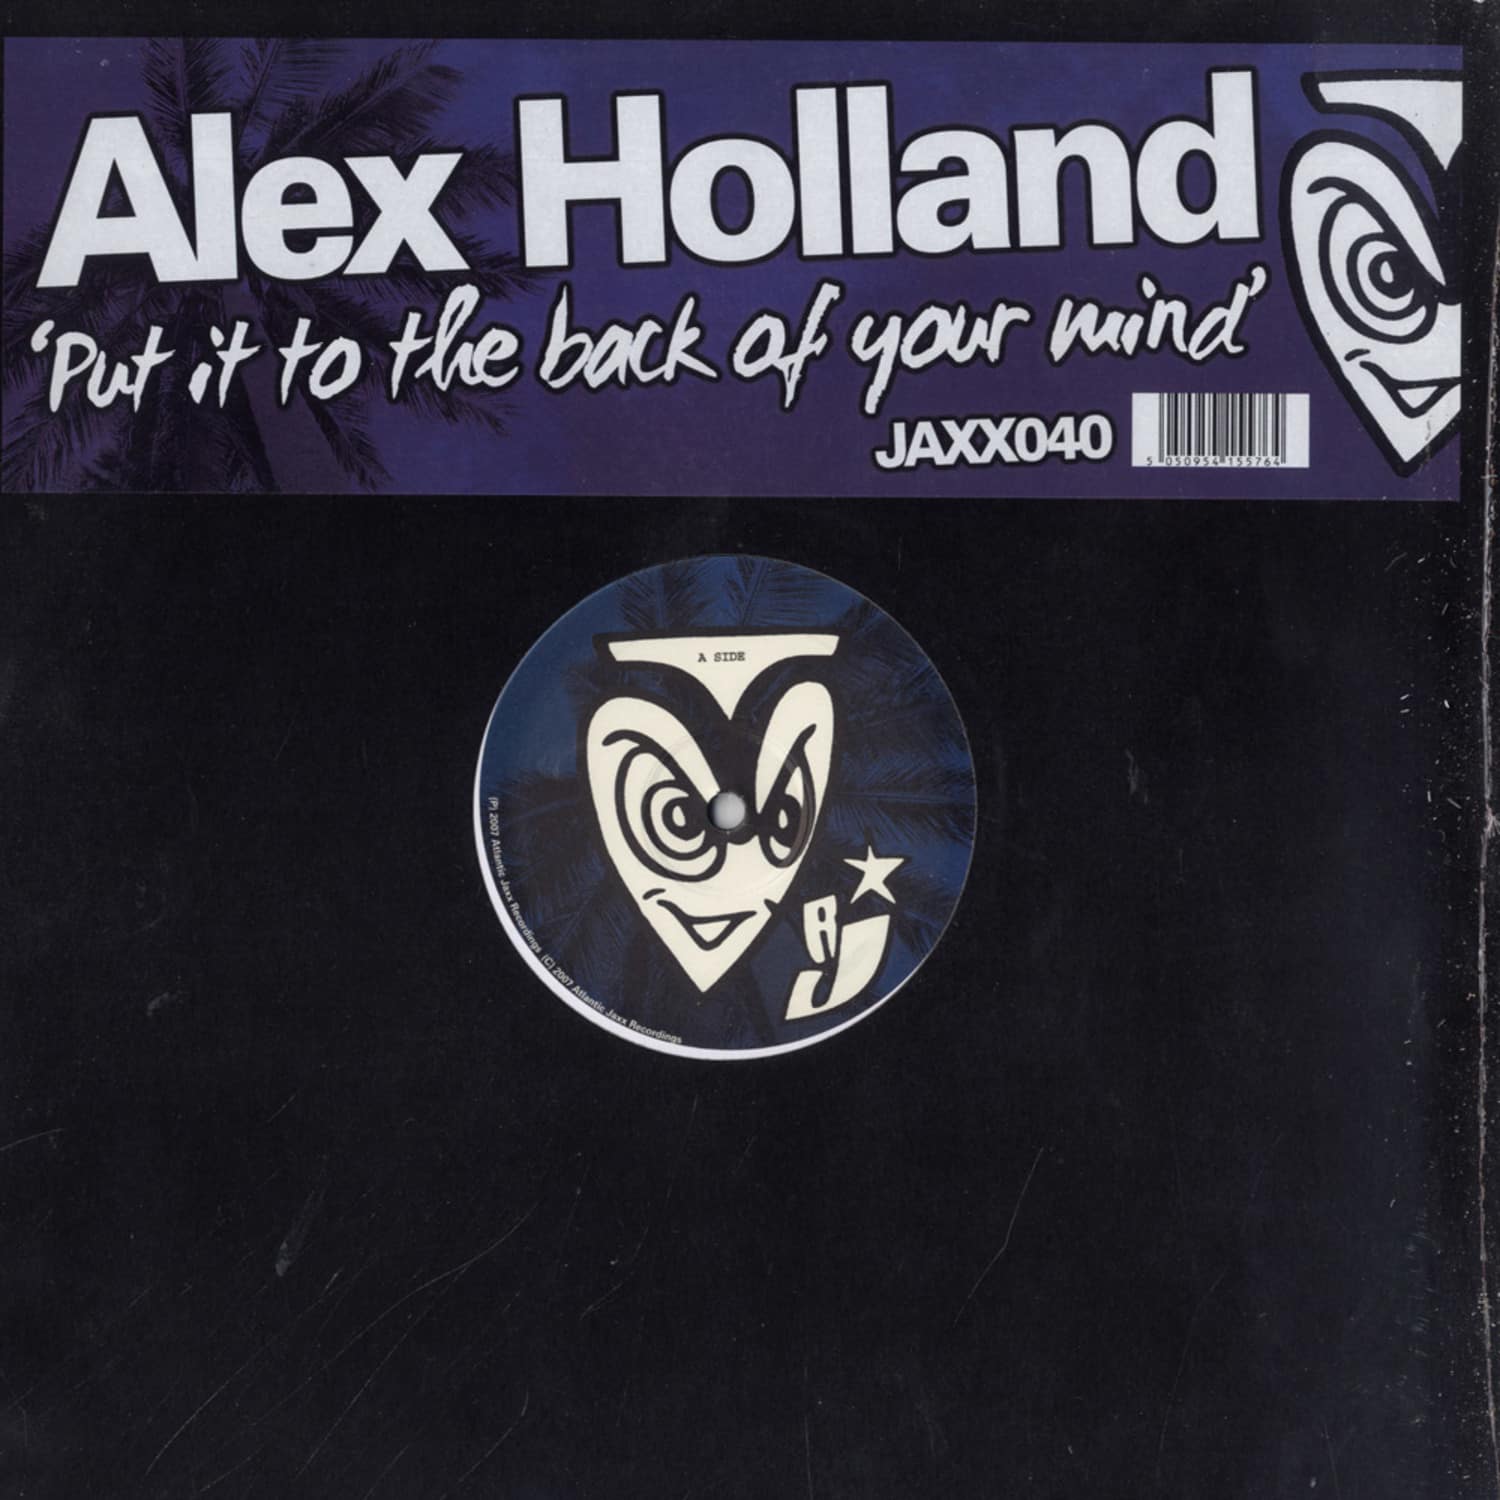 Alex Holland - PUT IT TO THE BACK OF YOUR MIND